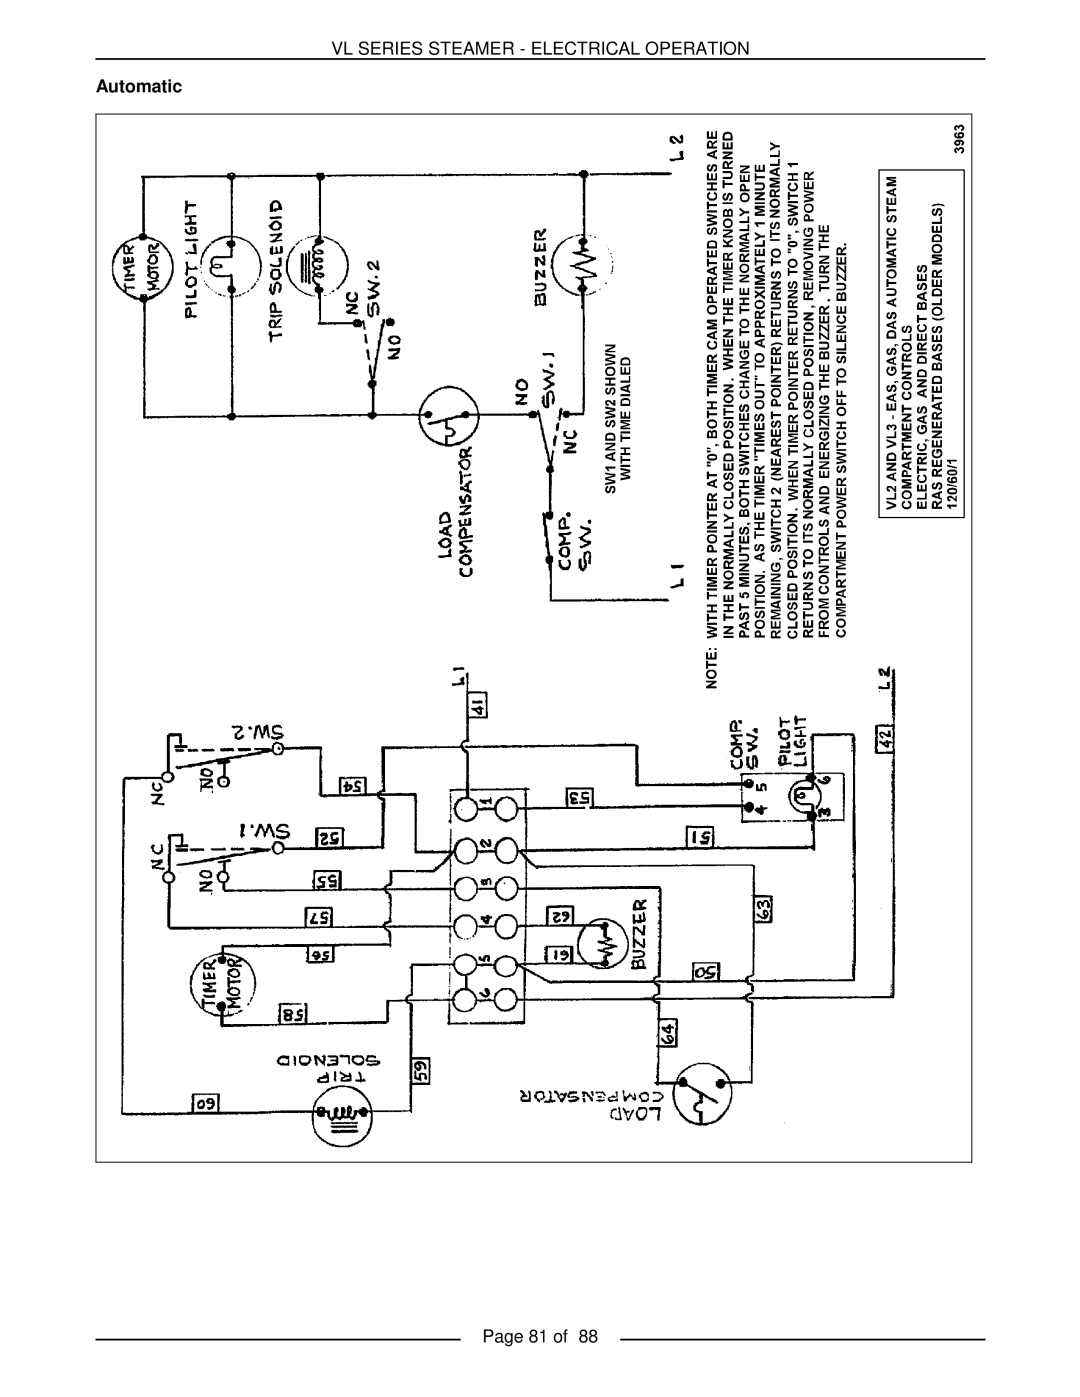 Vulcan-Hart VL2GMS, VL3GMS, VL3GAS, VL2GAS, VL2GSS, VL3GSS Vl Series Steamer - Electrical Operation, Automatic, Page 81 of 